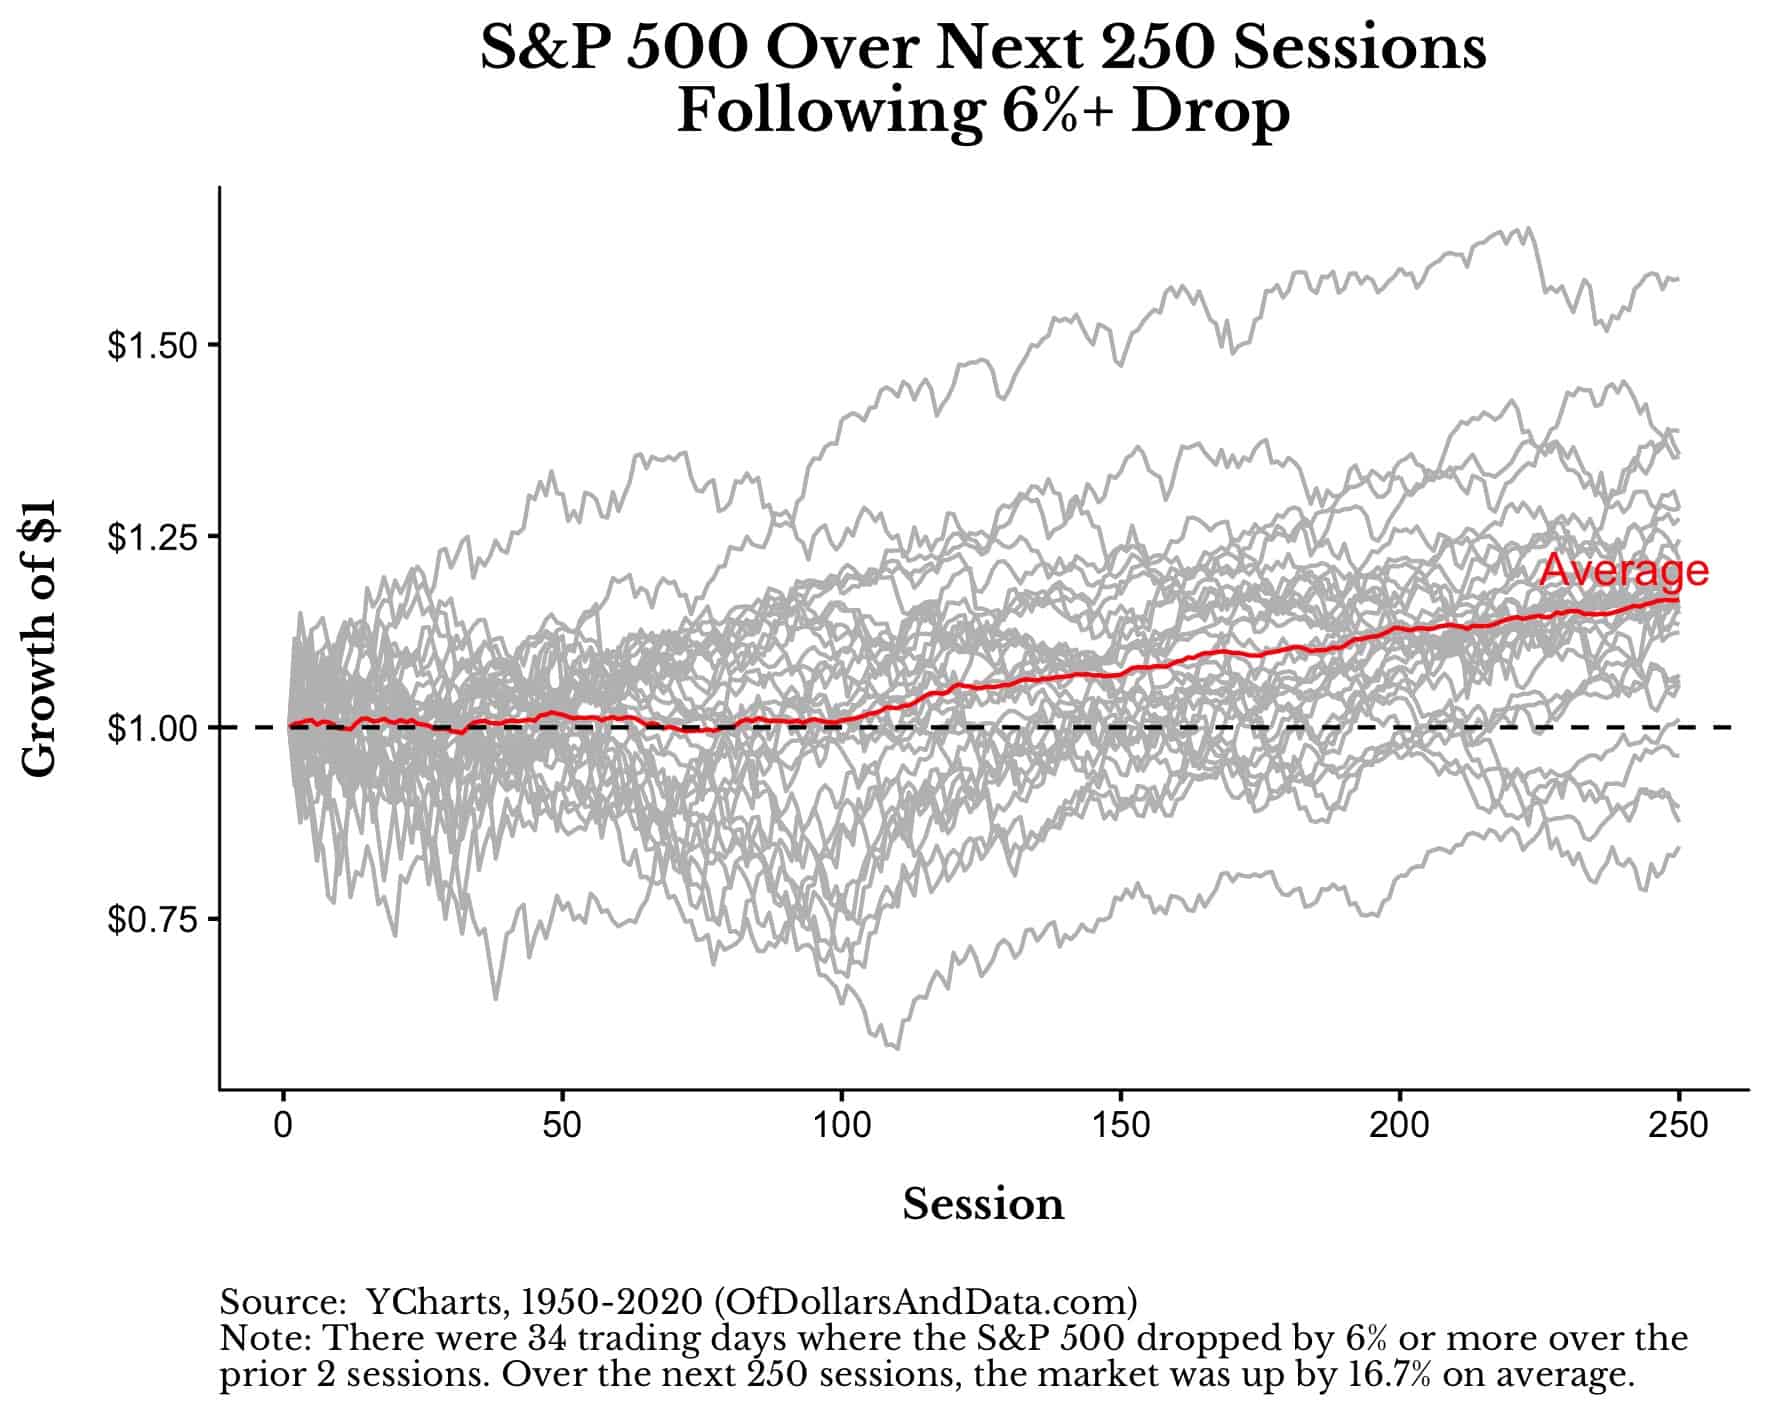 S&P 500 over next 250 sessions following a 6% or greater decline.